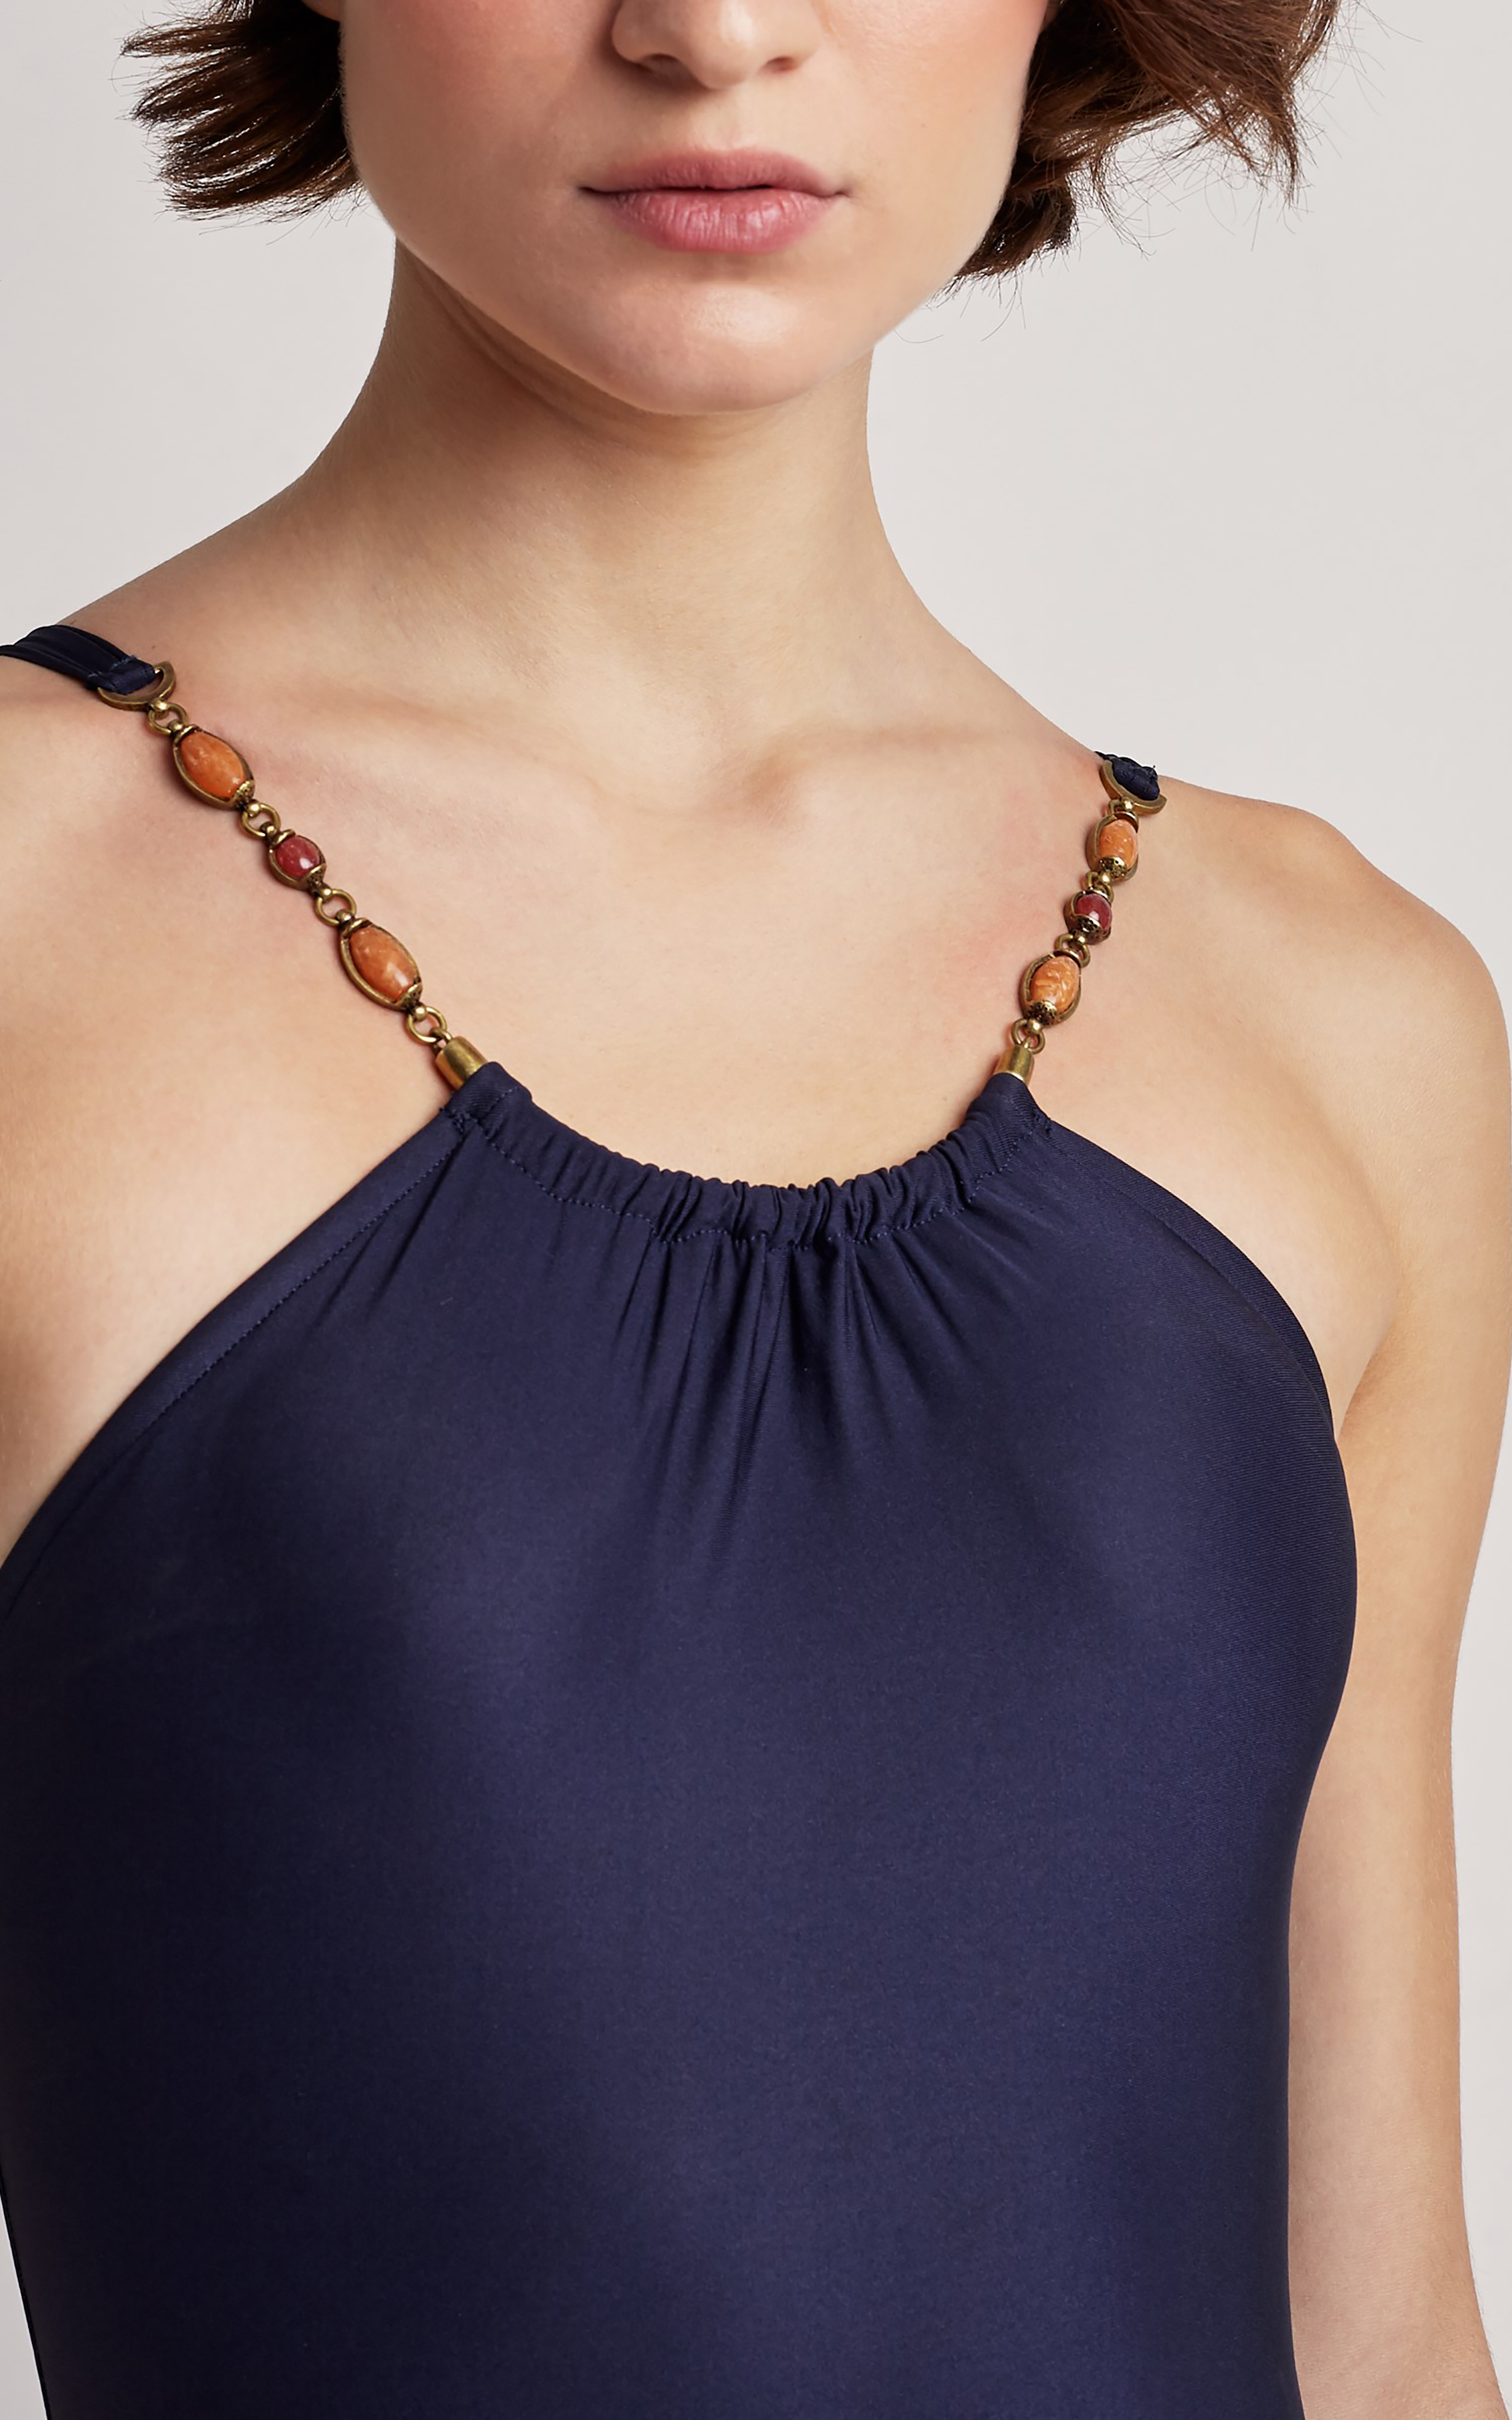 Shanghai Necklace Maillot